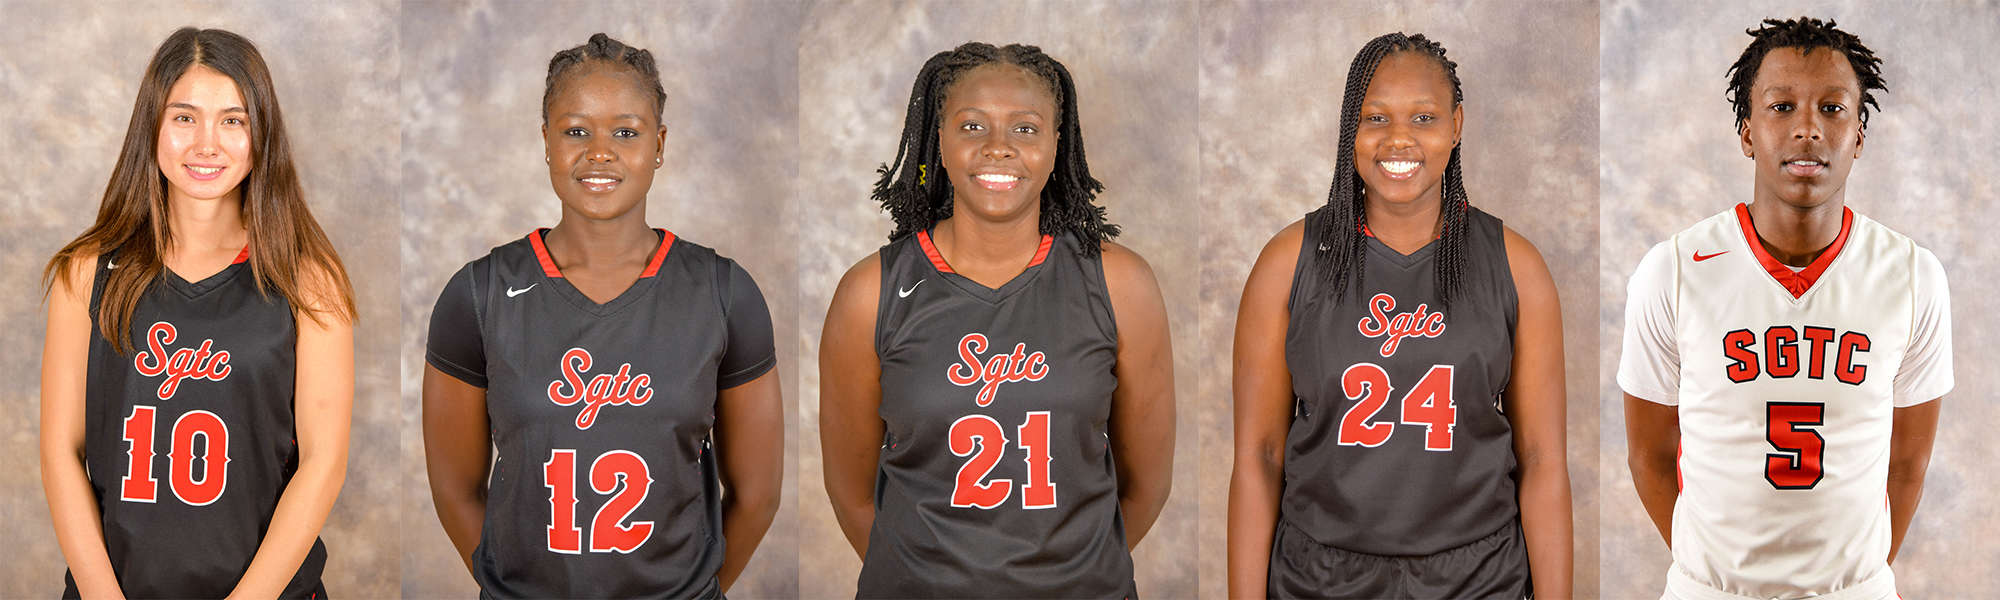 Shown above are the SGTC basketball players ranked nationally in the NJCAA Division I individual statistics January 8th poll. They are: Mari Hill, 10; Fatou Pouye, 12; Bigue Sarr, 21; Laky Samo, 24, and Justin Johnson, 5.